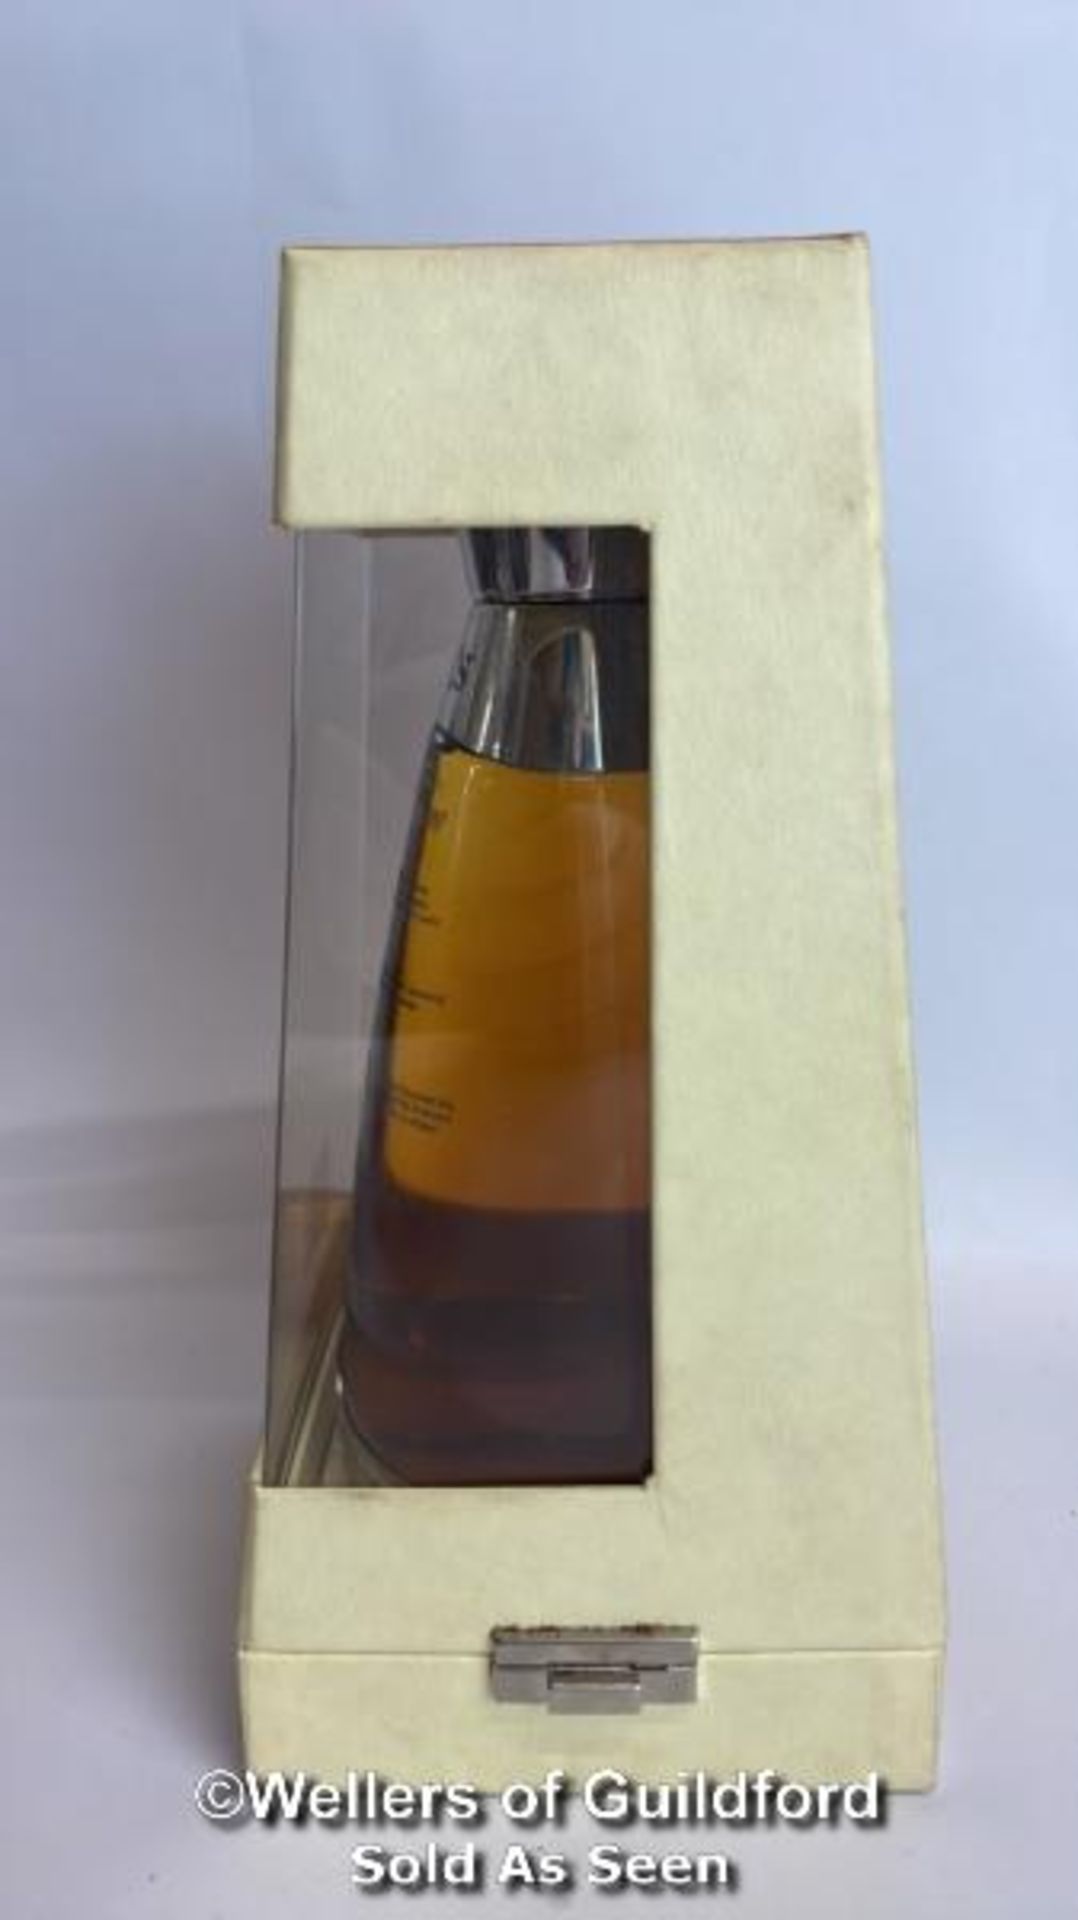 Bell's Extra Special 2000 Millenium Water of Life Whisky, Aged 8 Years, 70cl, 40% vol, In original - Image 6 of 10